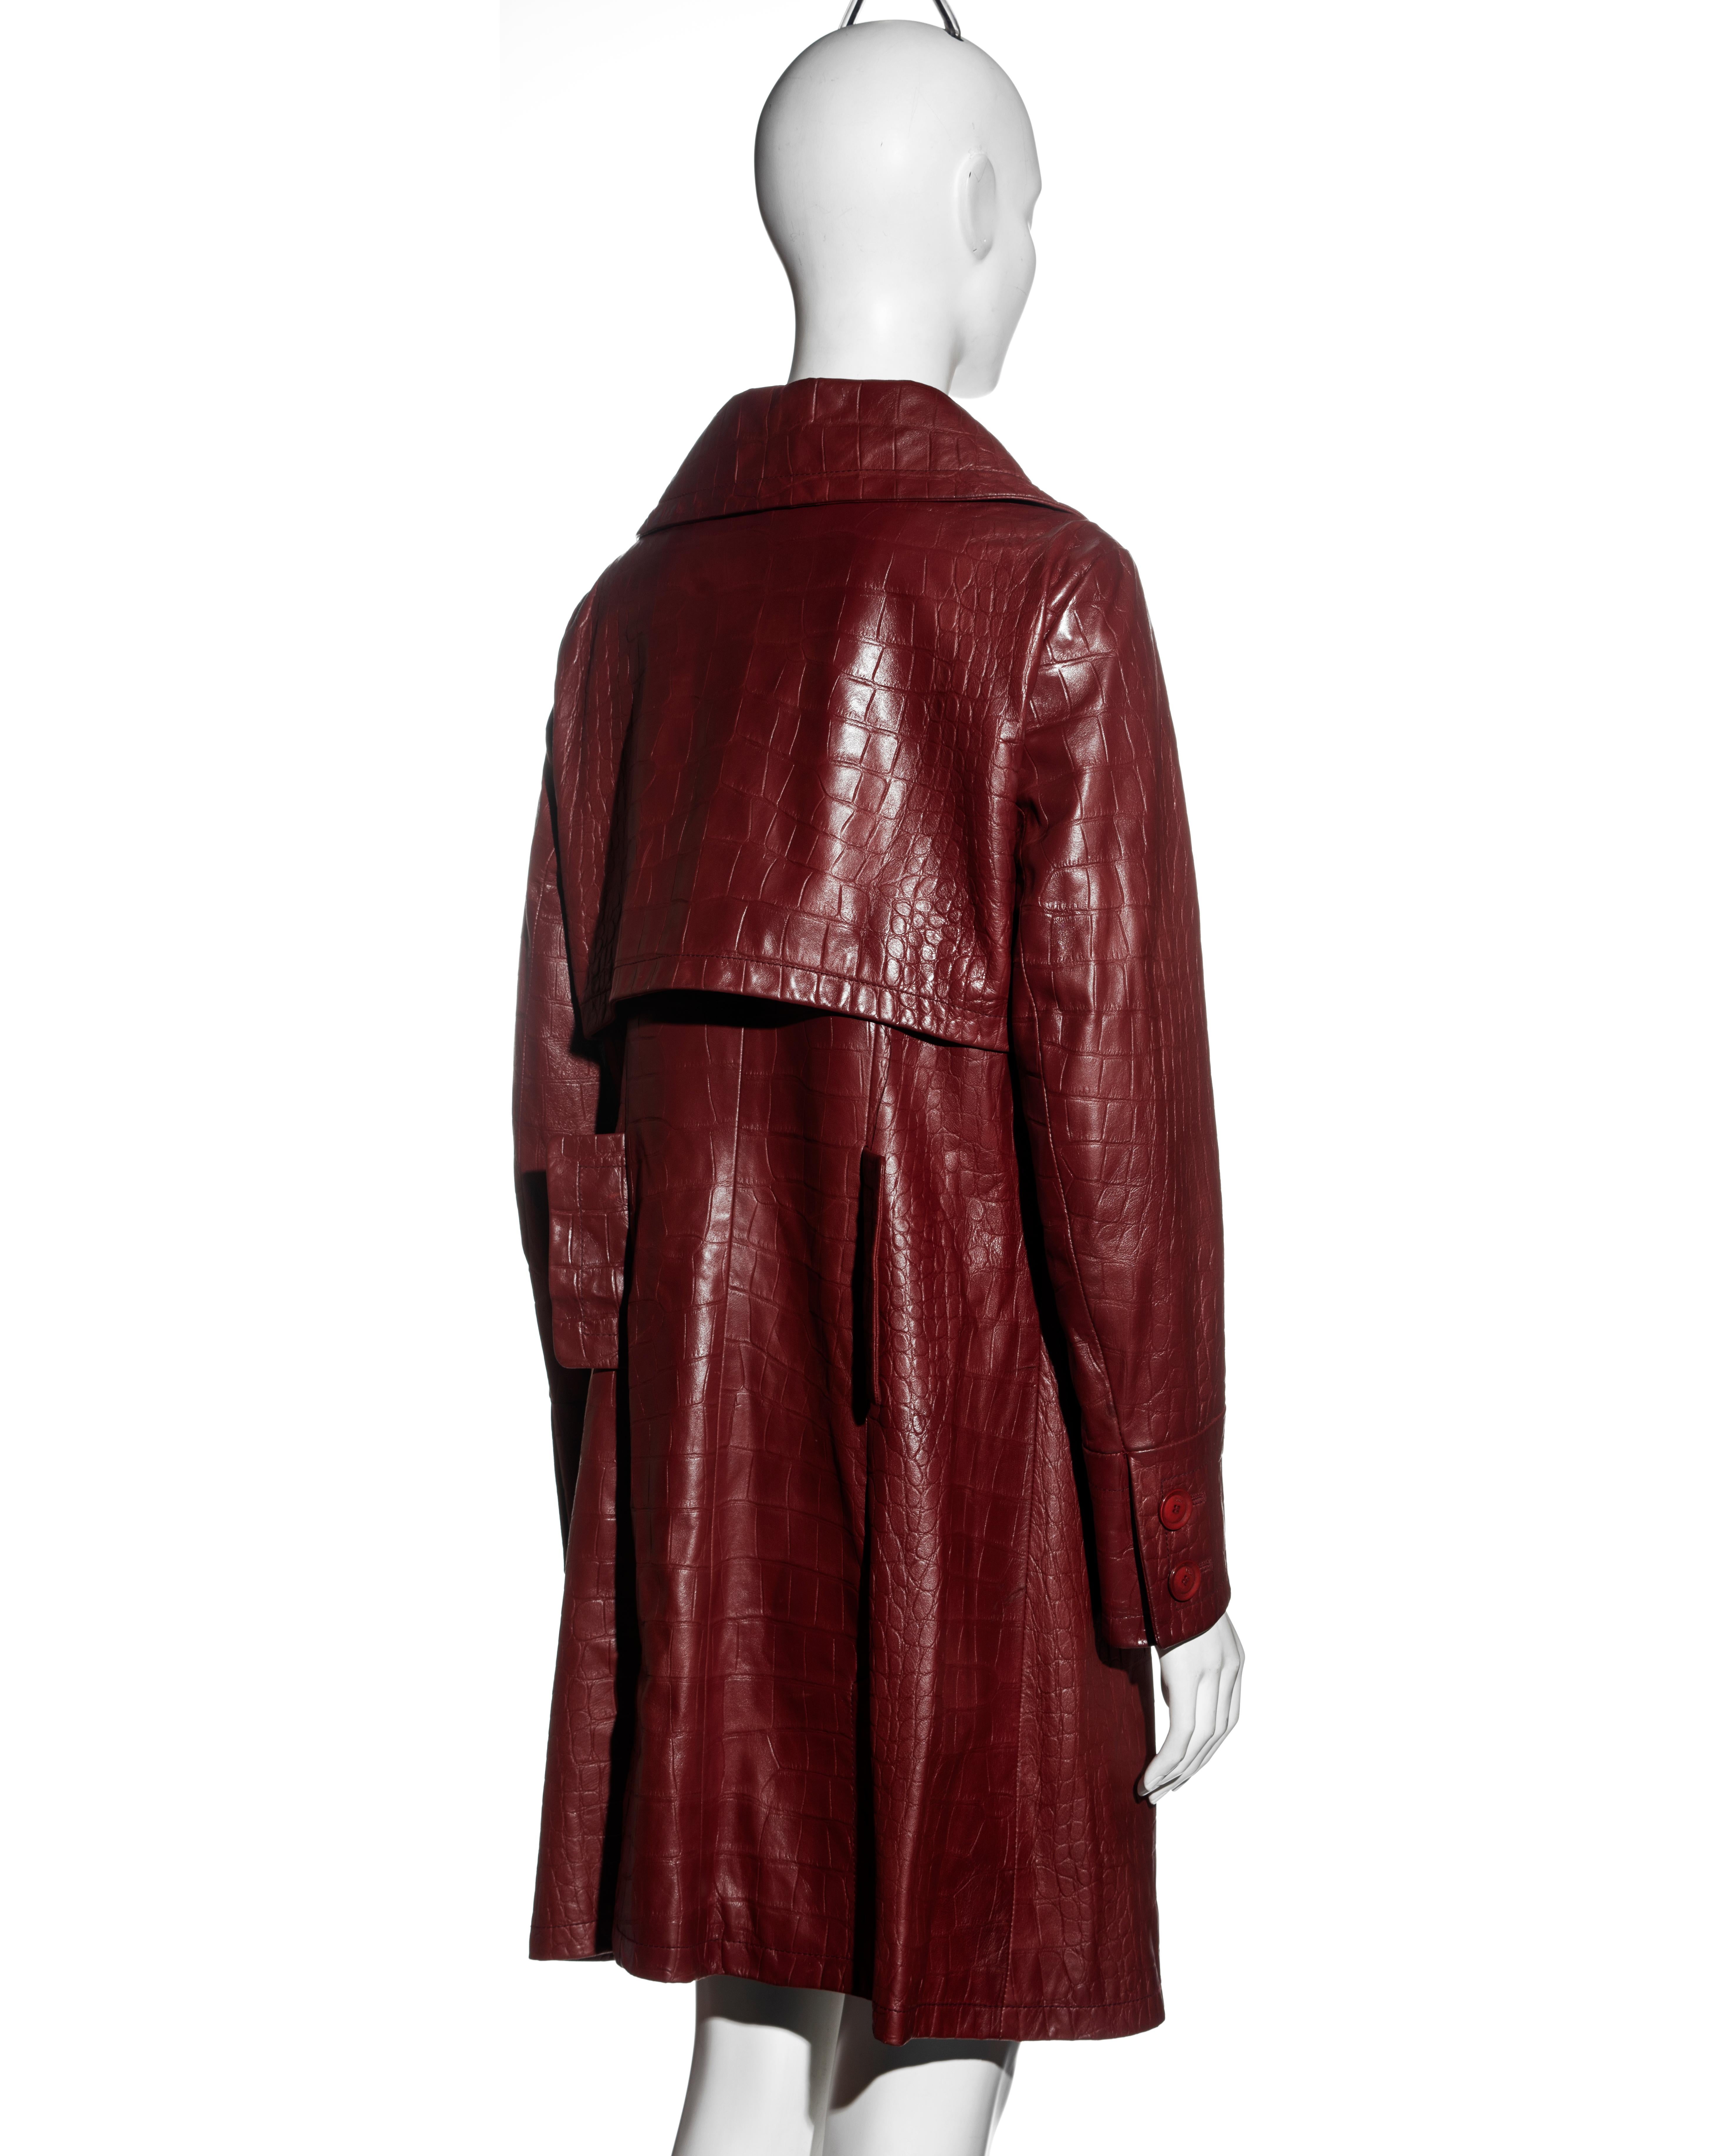 Christian Dior by John Galliano red croc-embossed lambskin leather coat, fw 2005 For Sale 5